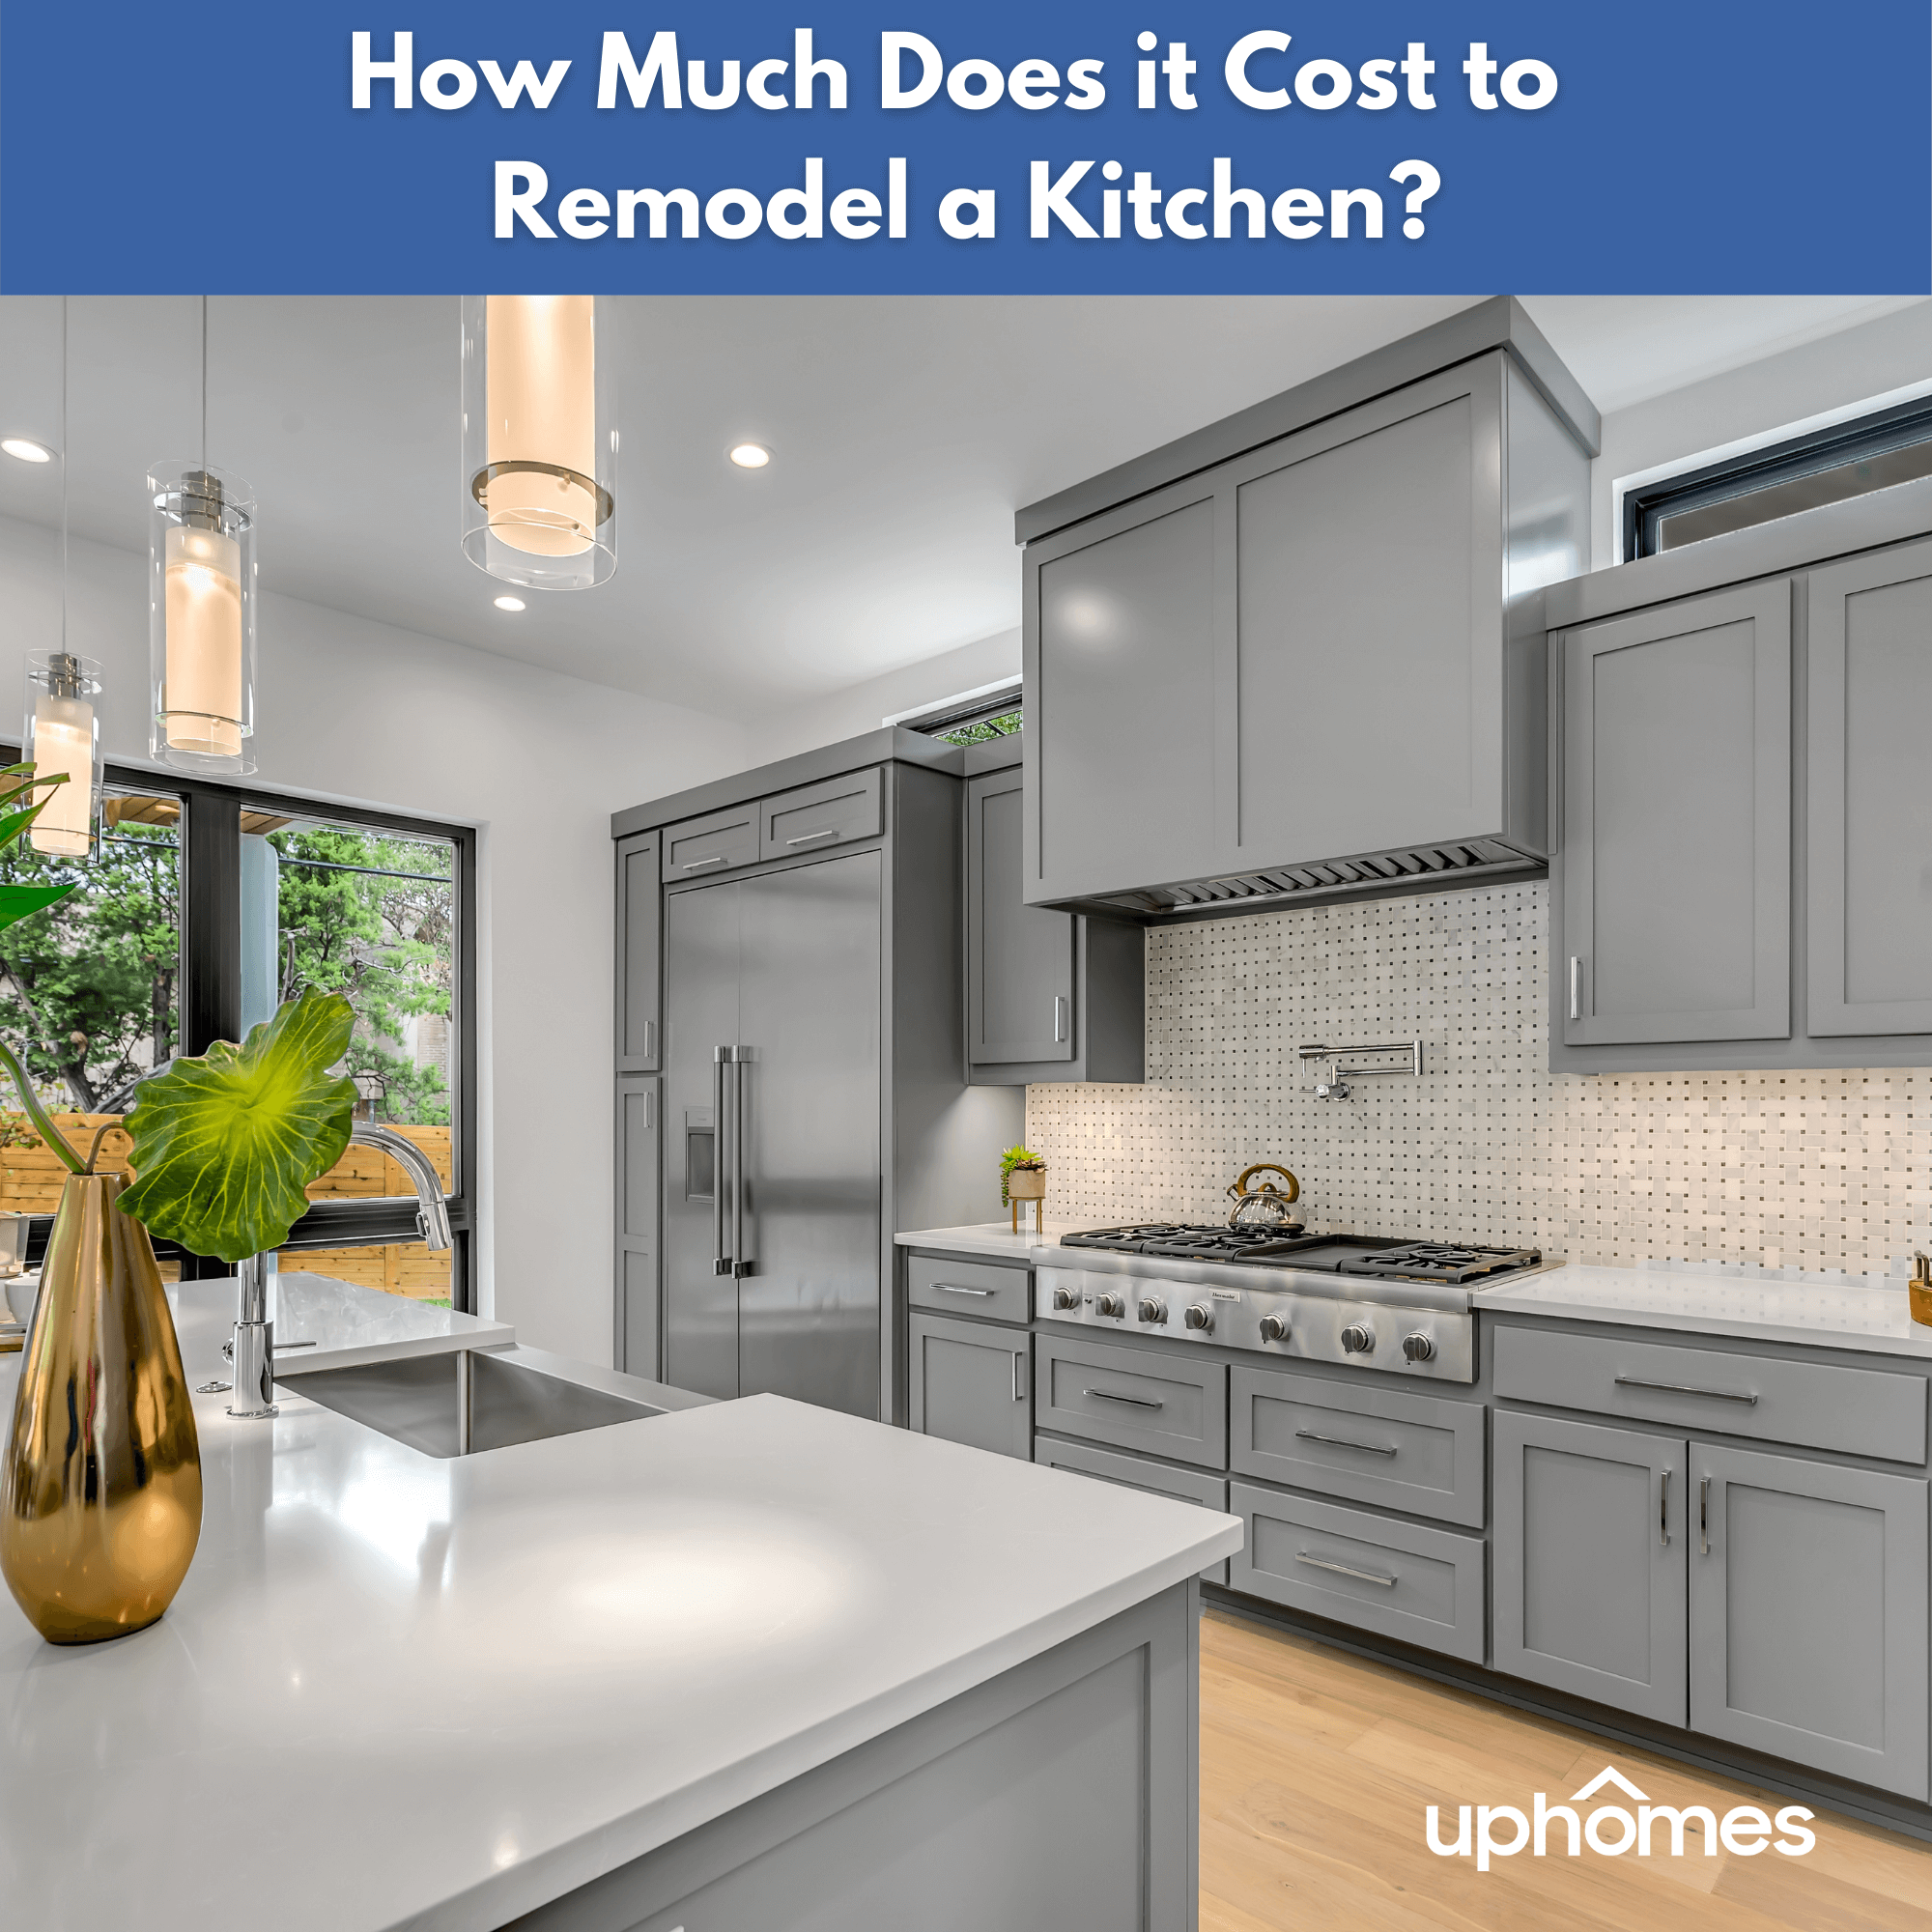 How Much Does It Cost to Remodel a Kitchen: Kitchen Cost